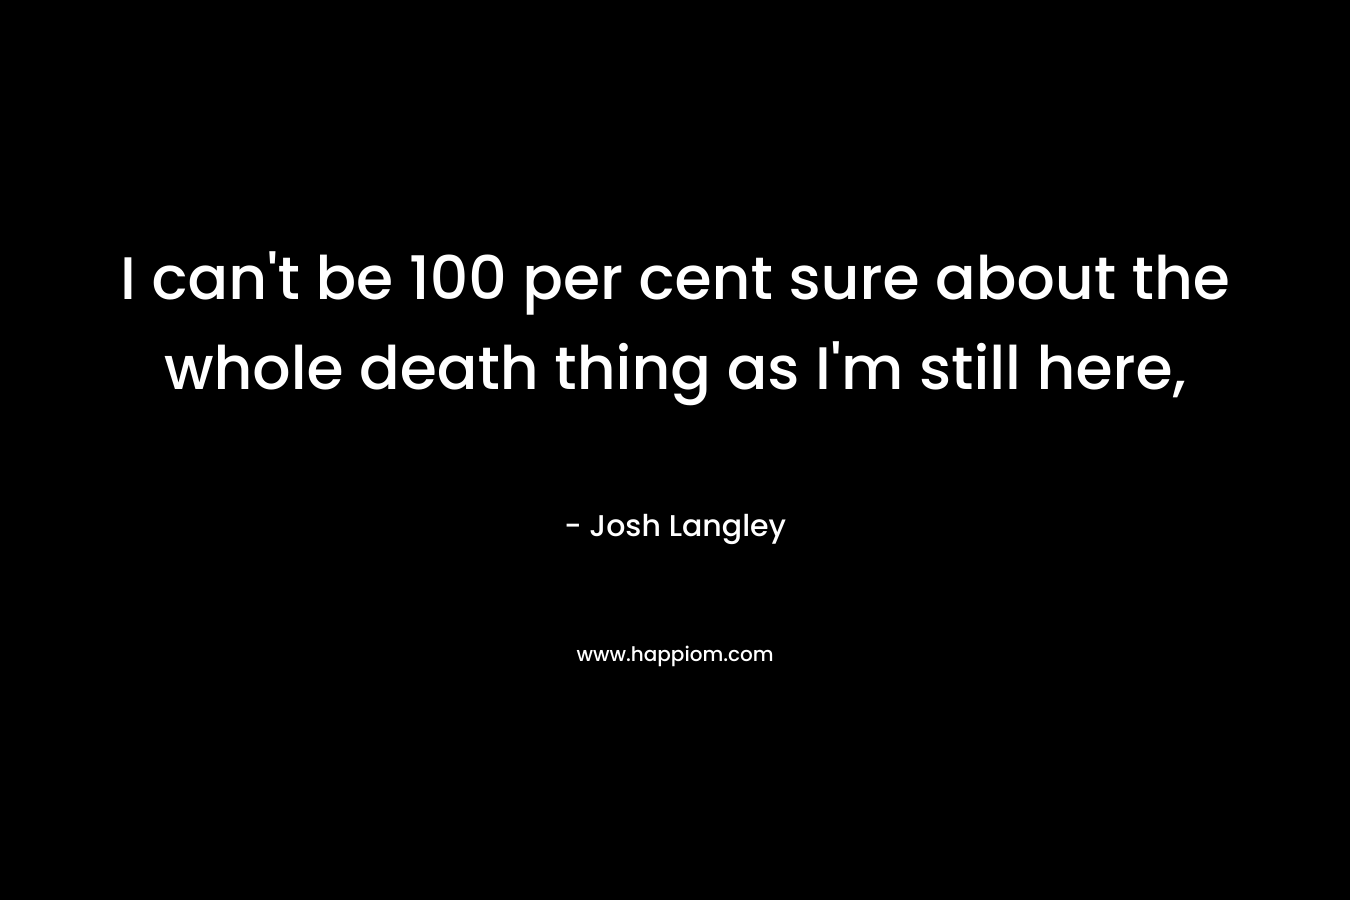 I can’t be 100 per cent sure about the whole death thing as I’m still here, – Josh Langley